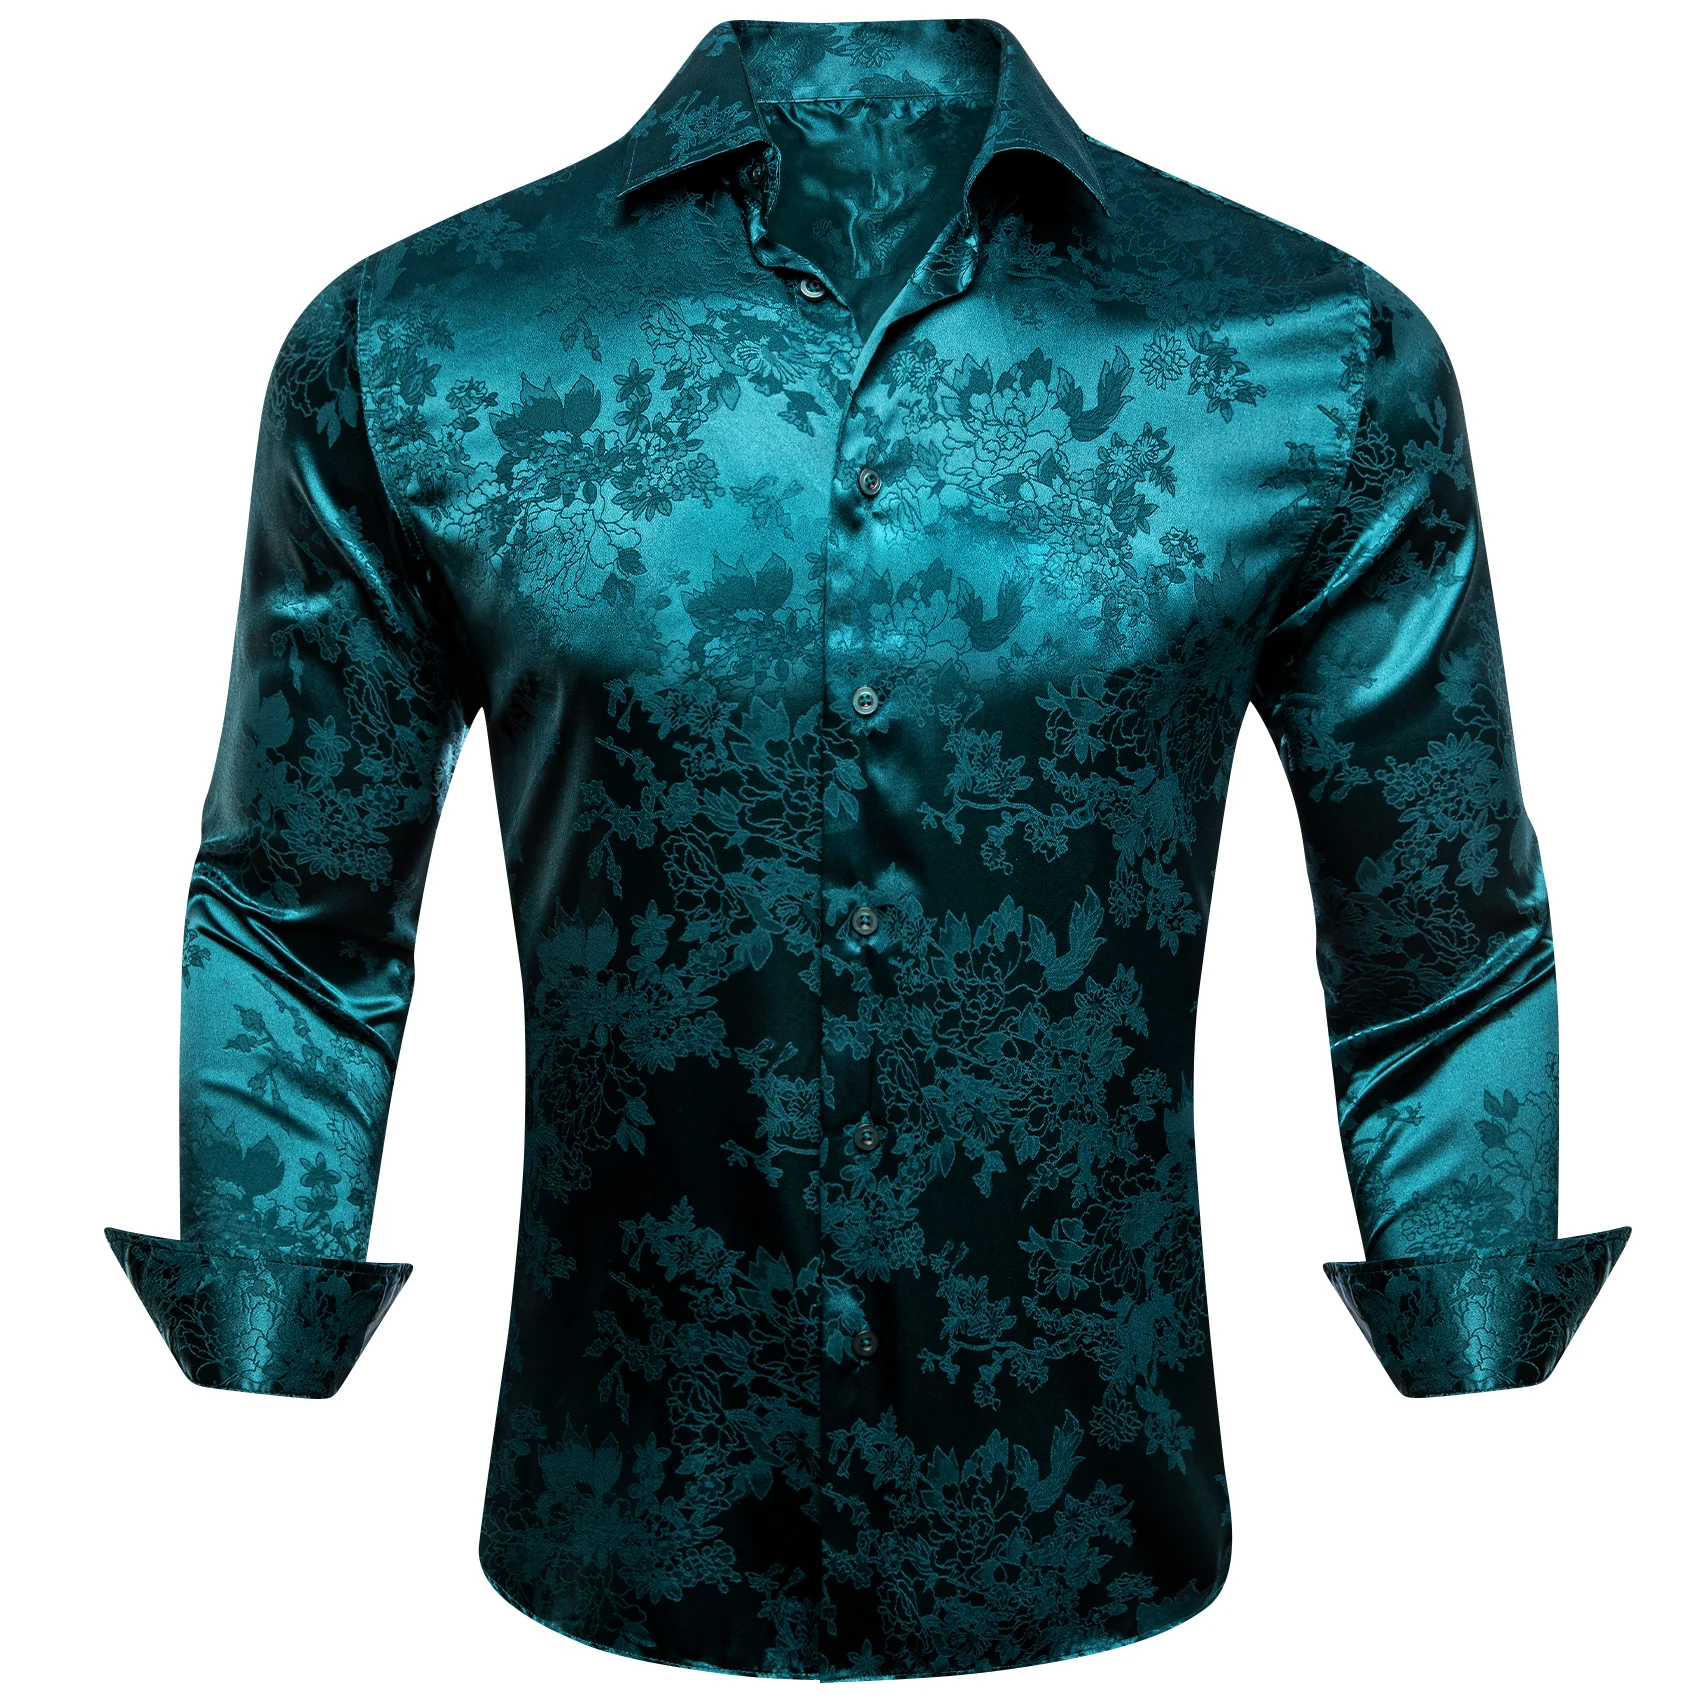 Luxury Shirts for Men Silk Long Sleeve peacock blue Flower Slim Fit Male Blouese Casual Tops Formal Breathable Barry Wang